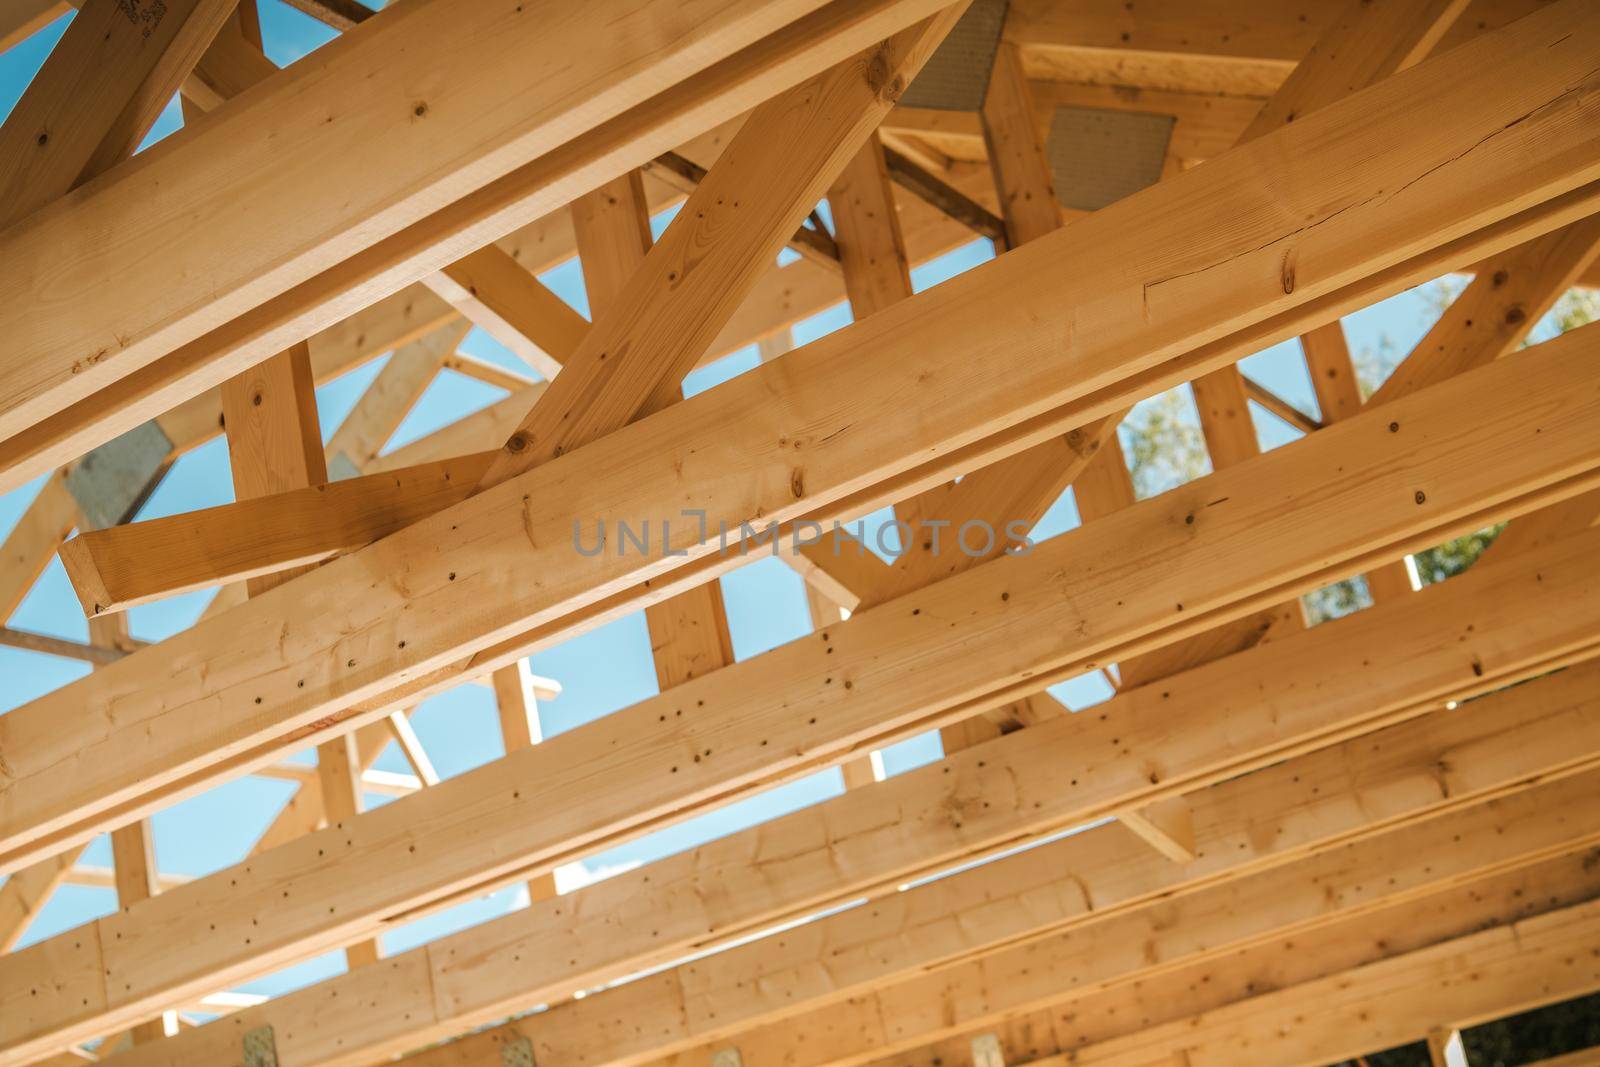 Wooden Roof Construction Beams Closeup Photo. Construction Industry Theme. 